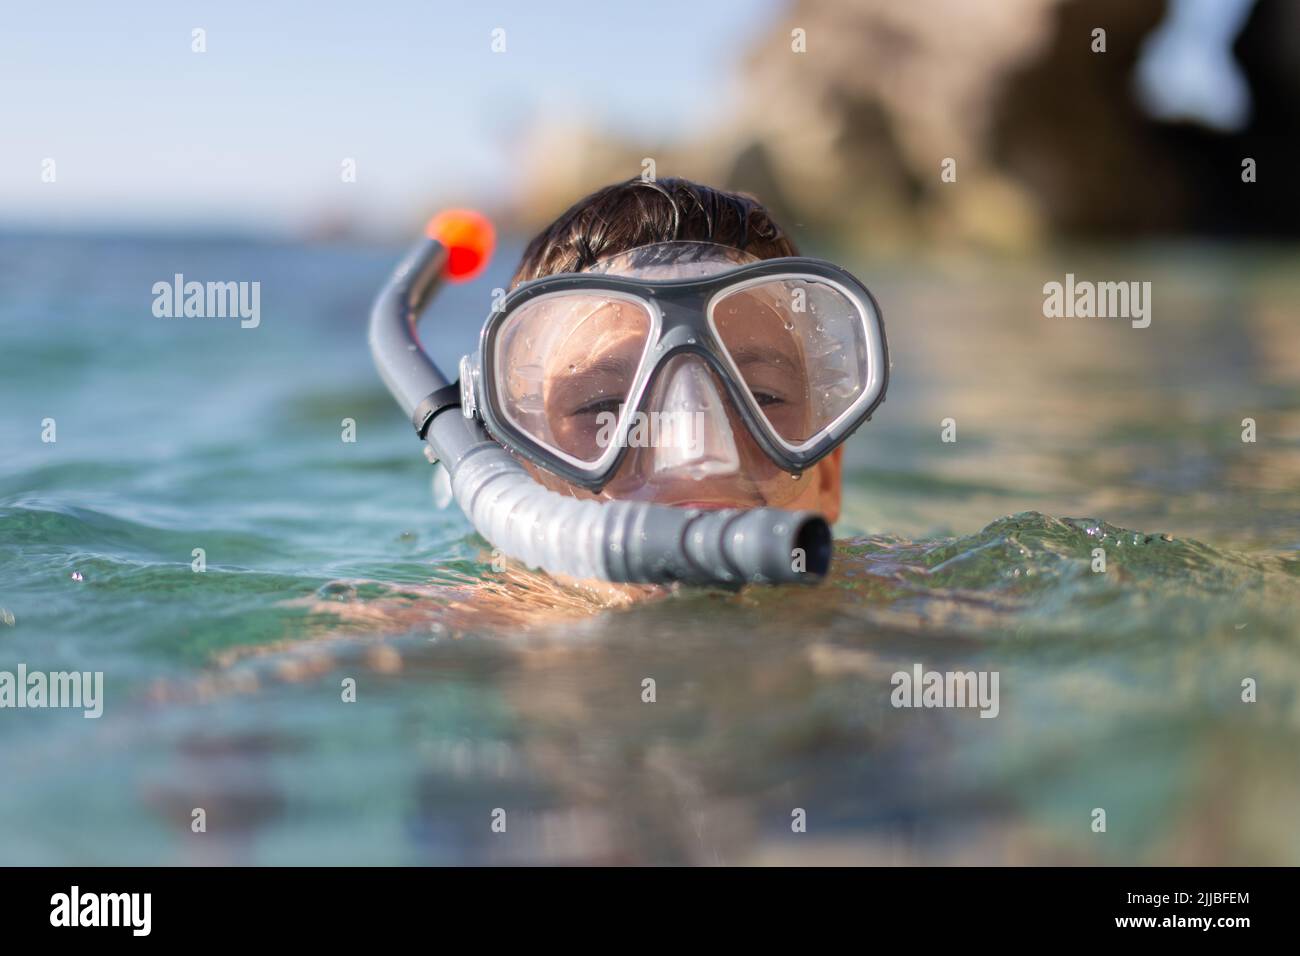 Boy with goggles and pipe before diving at rocky seashore portrait Stock Photo